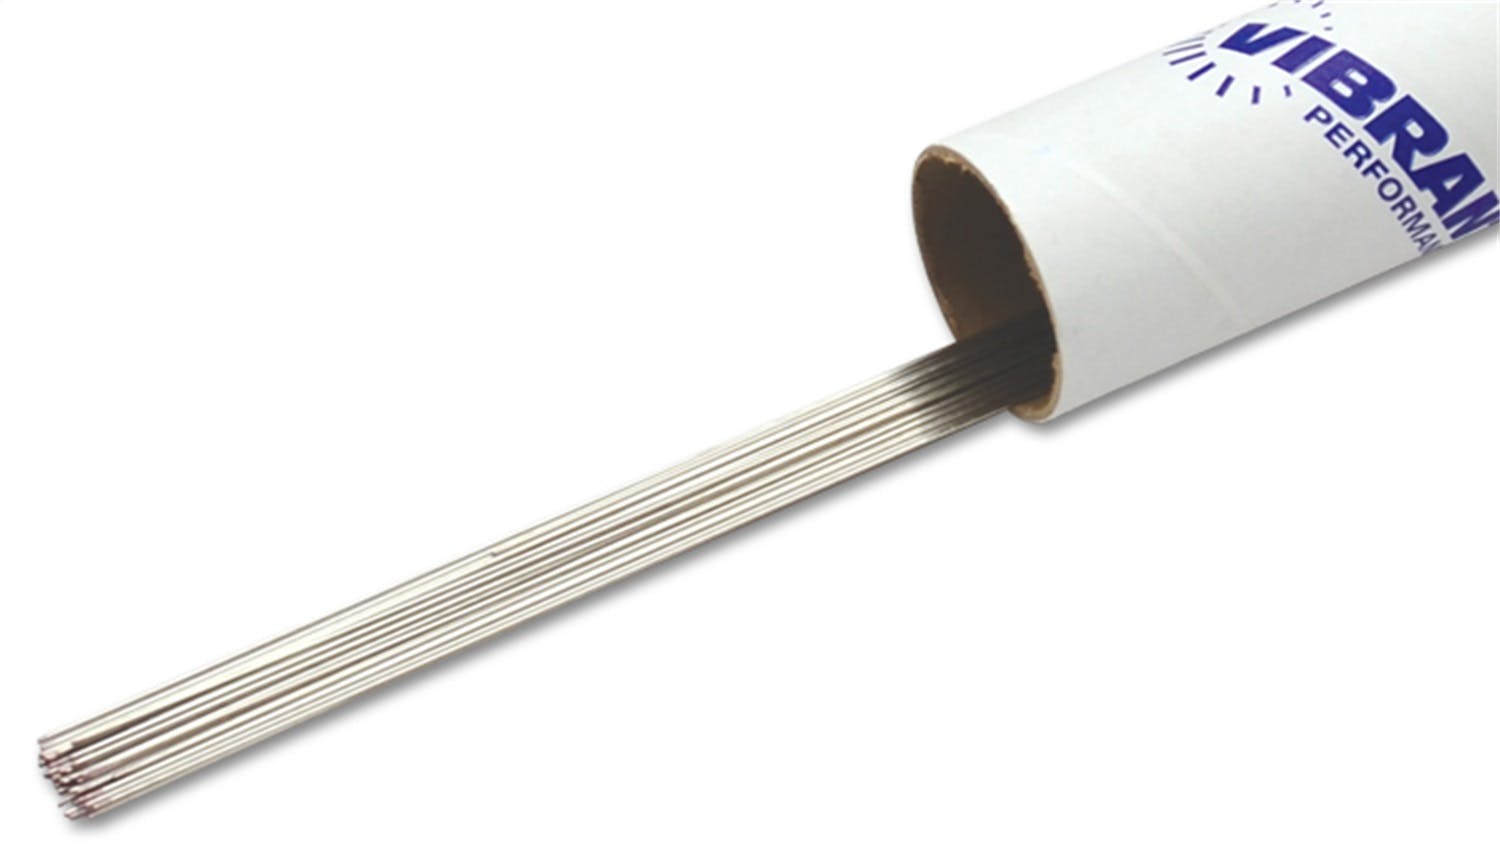 Vibrant Performance 29243 Wire Stainless Steel ER309L - 0.045 inch Thick (1.2mm) - 39.5 inch Long Rod - 3lb box